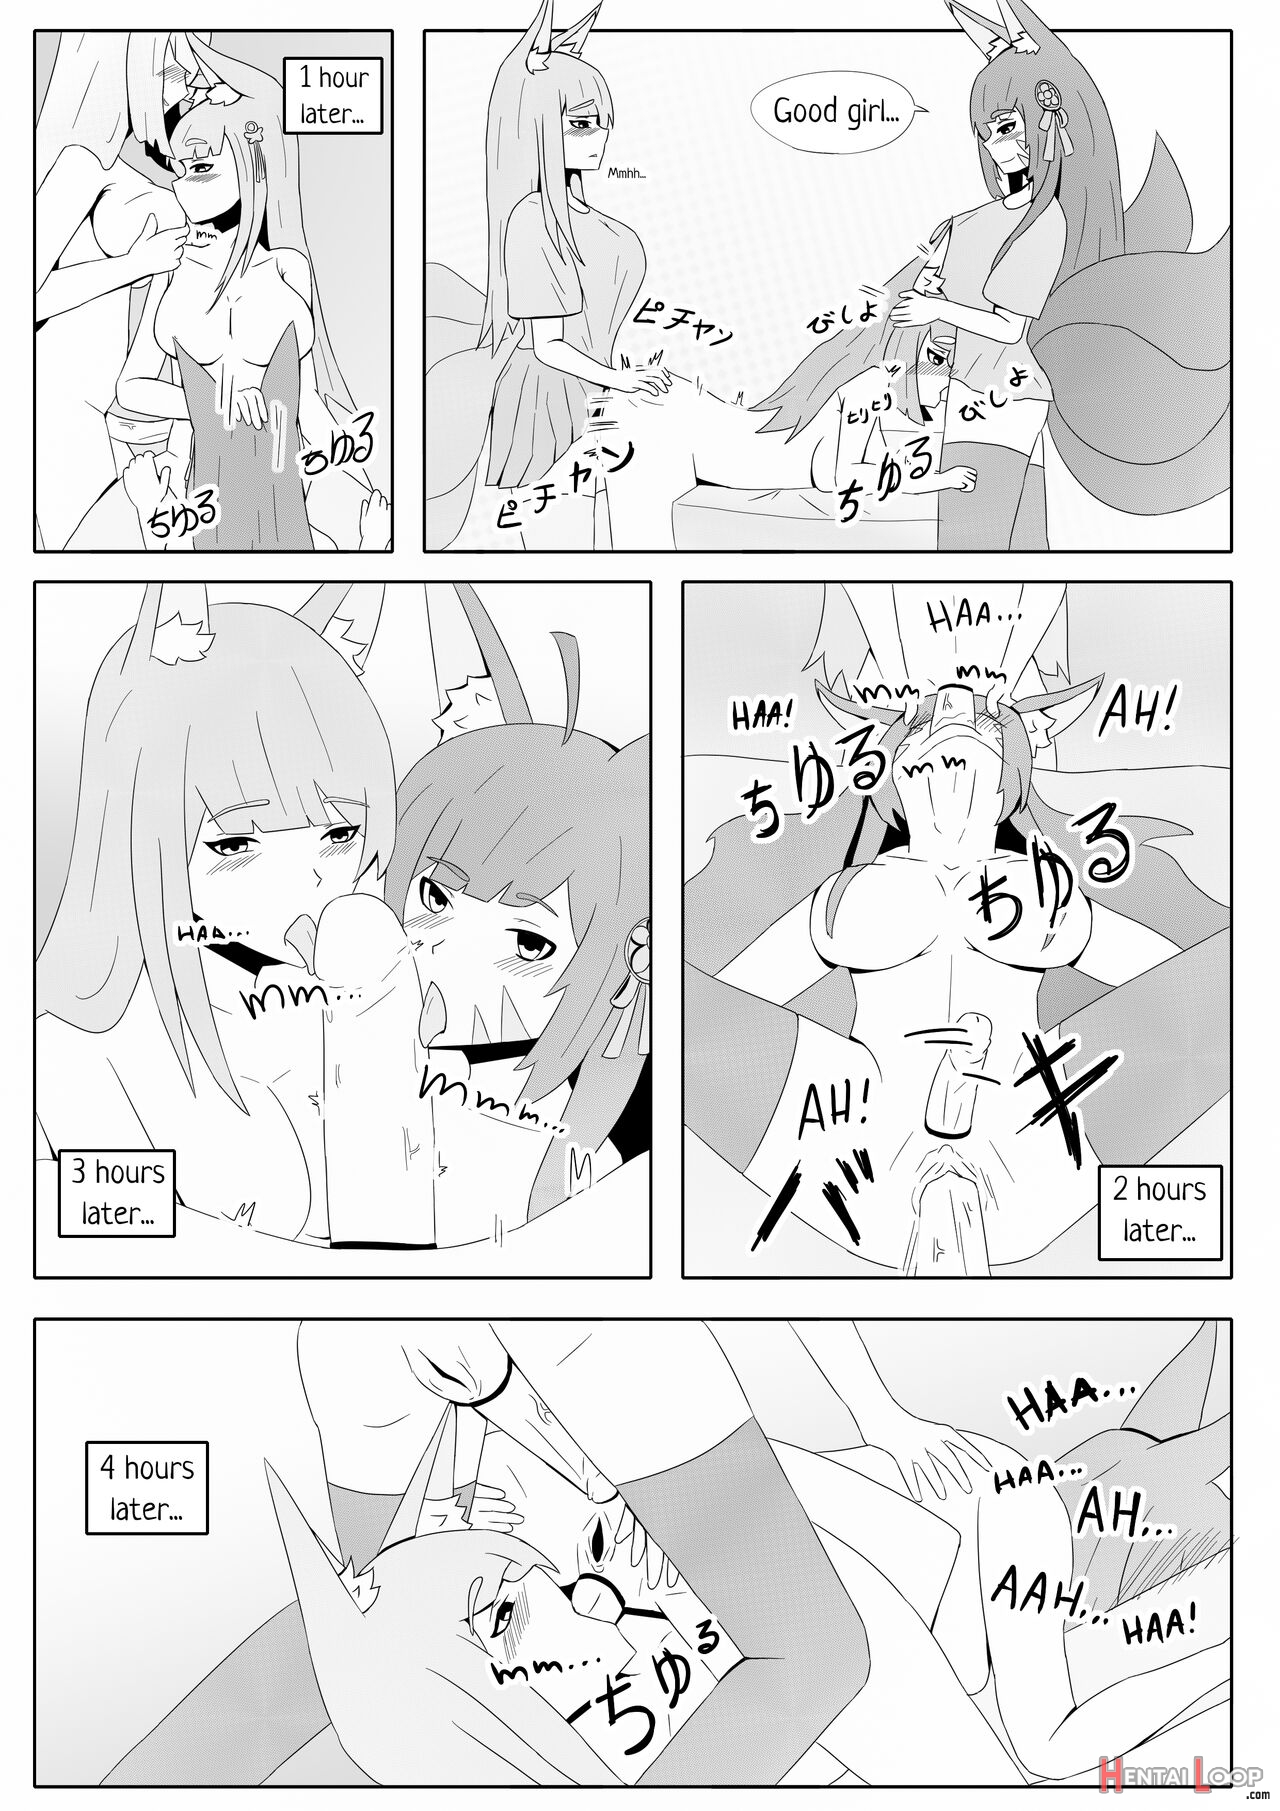 Amagi’s Very Special Massage page 9